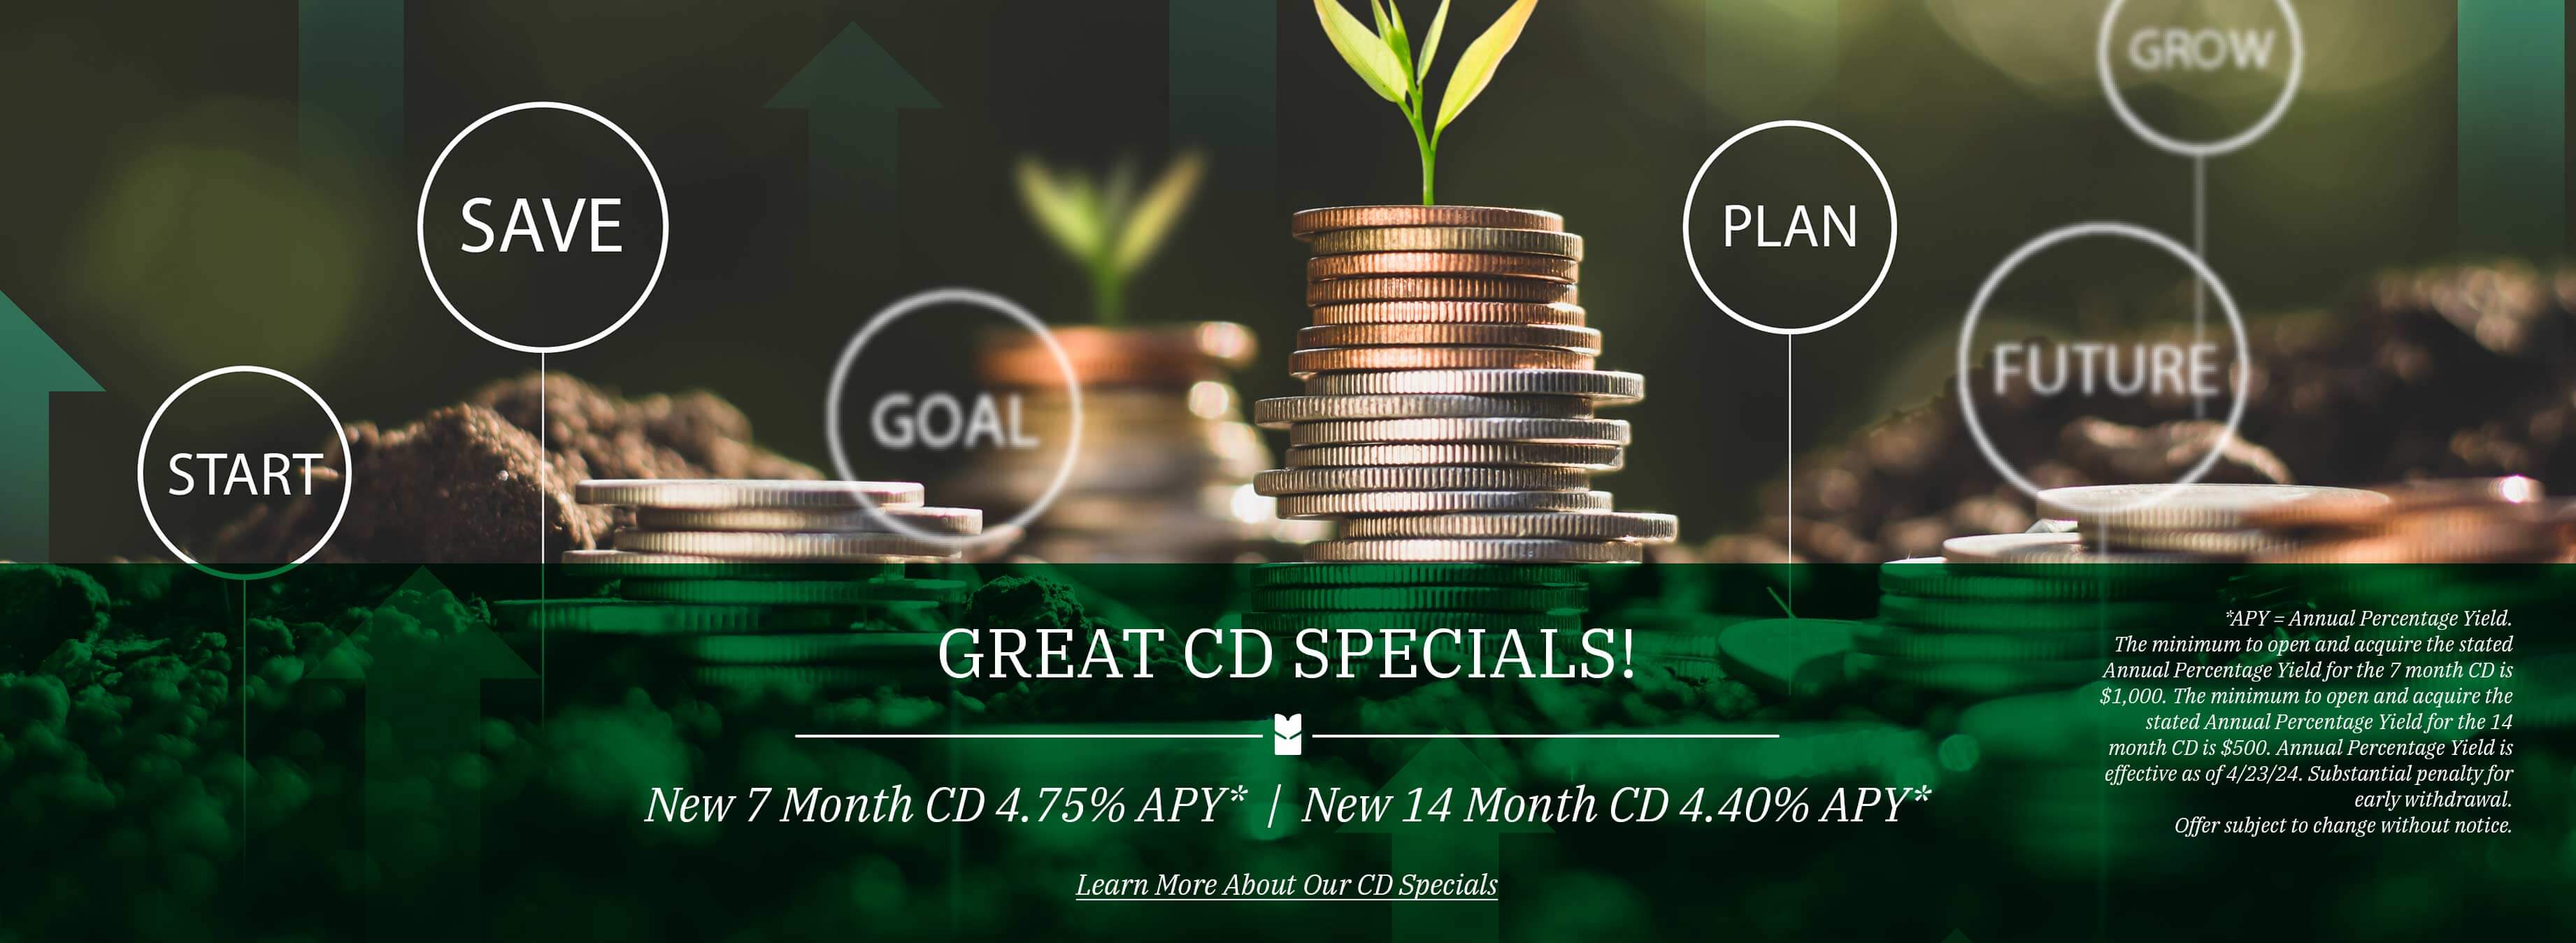 Great CD Specials! New 7 Month CD 4.75% APY. New 14 Month CD 4.40% APY. Learn more about our CD specials. *APY = Annual Percentage Yield. The minimum to open and acquire the stated Annual Percentage Yield for the 7 month CD is $1,000. The minimum to open and acquire the stated Annual Percentage Yield for the 14 month CD is $500. Annual Percentage Yield is effective as of 4/23/24. Substantial penalty for early withdrawal. Offer subject to change without notice.